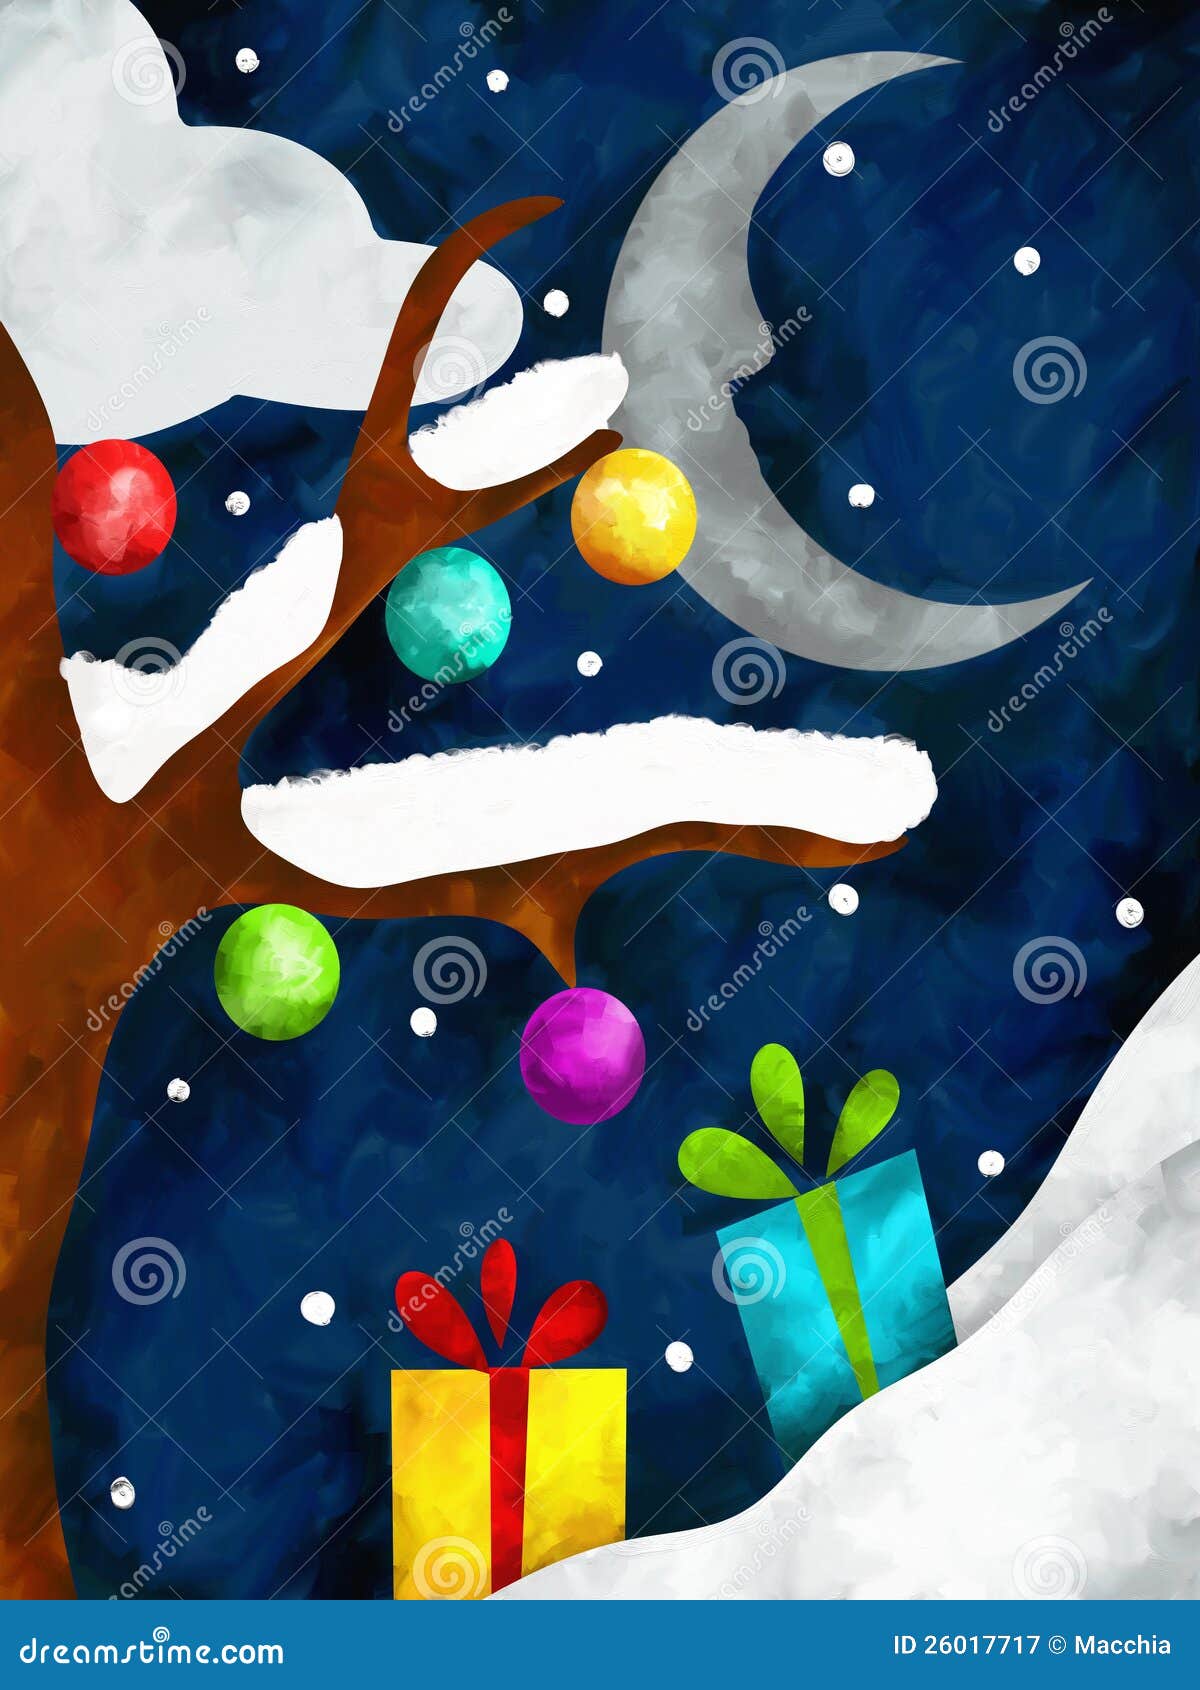 Moon and gifts stock illustration. Illustration of painting - 26017717